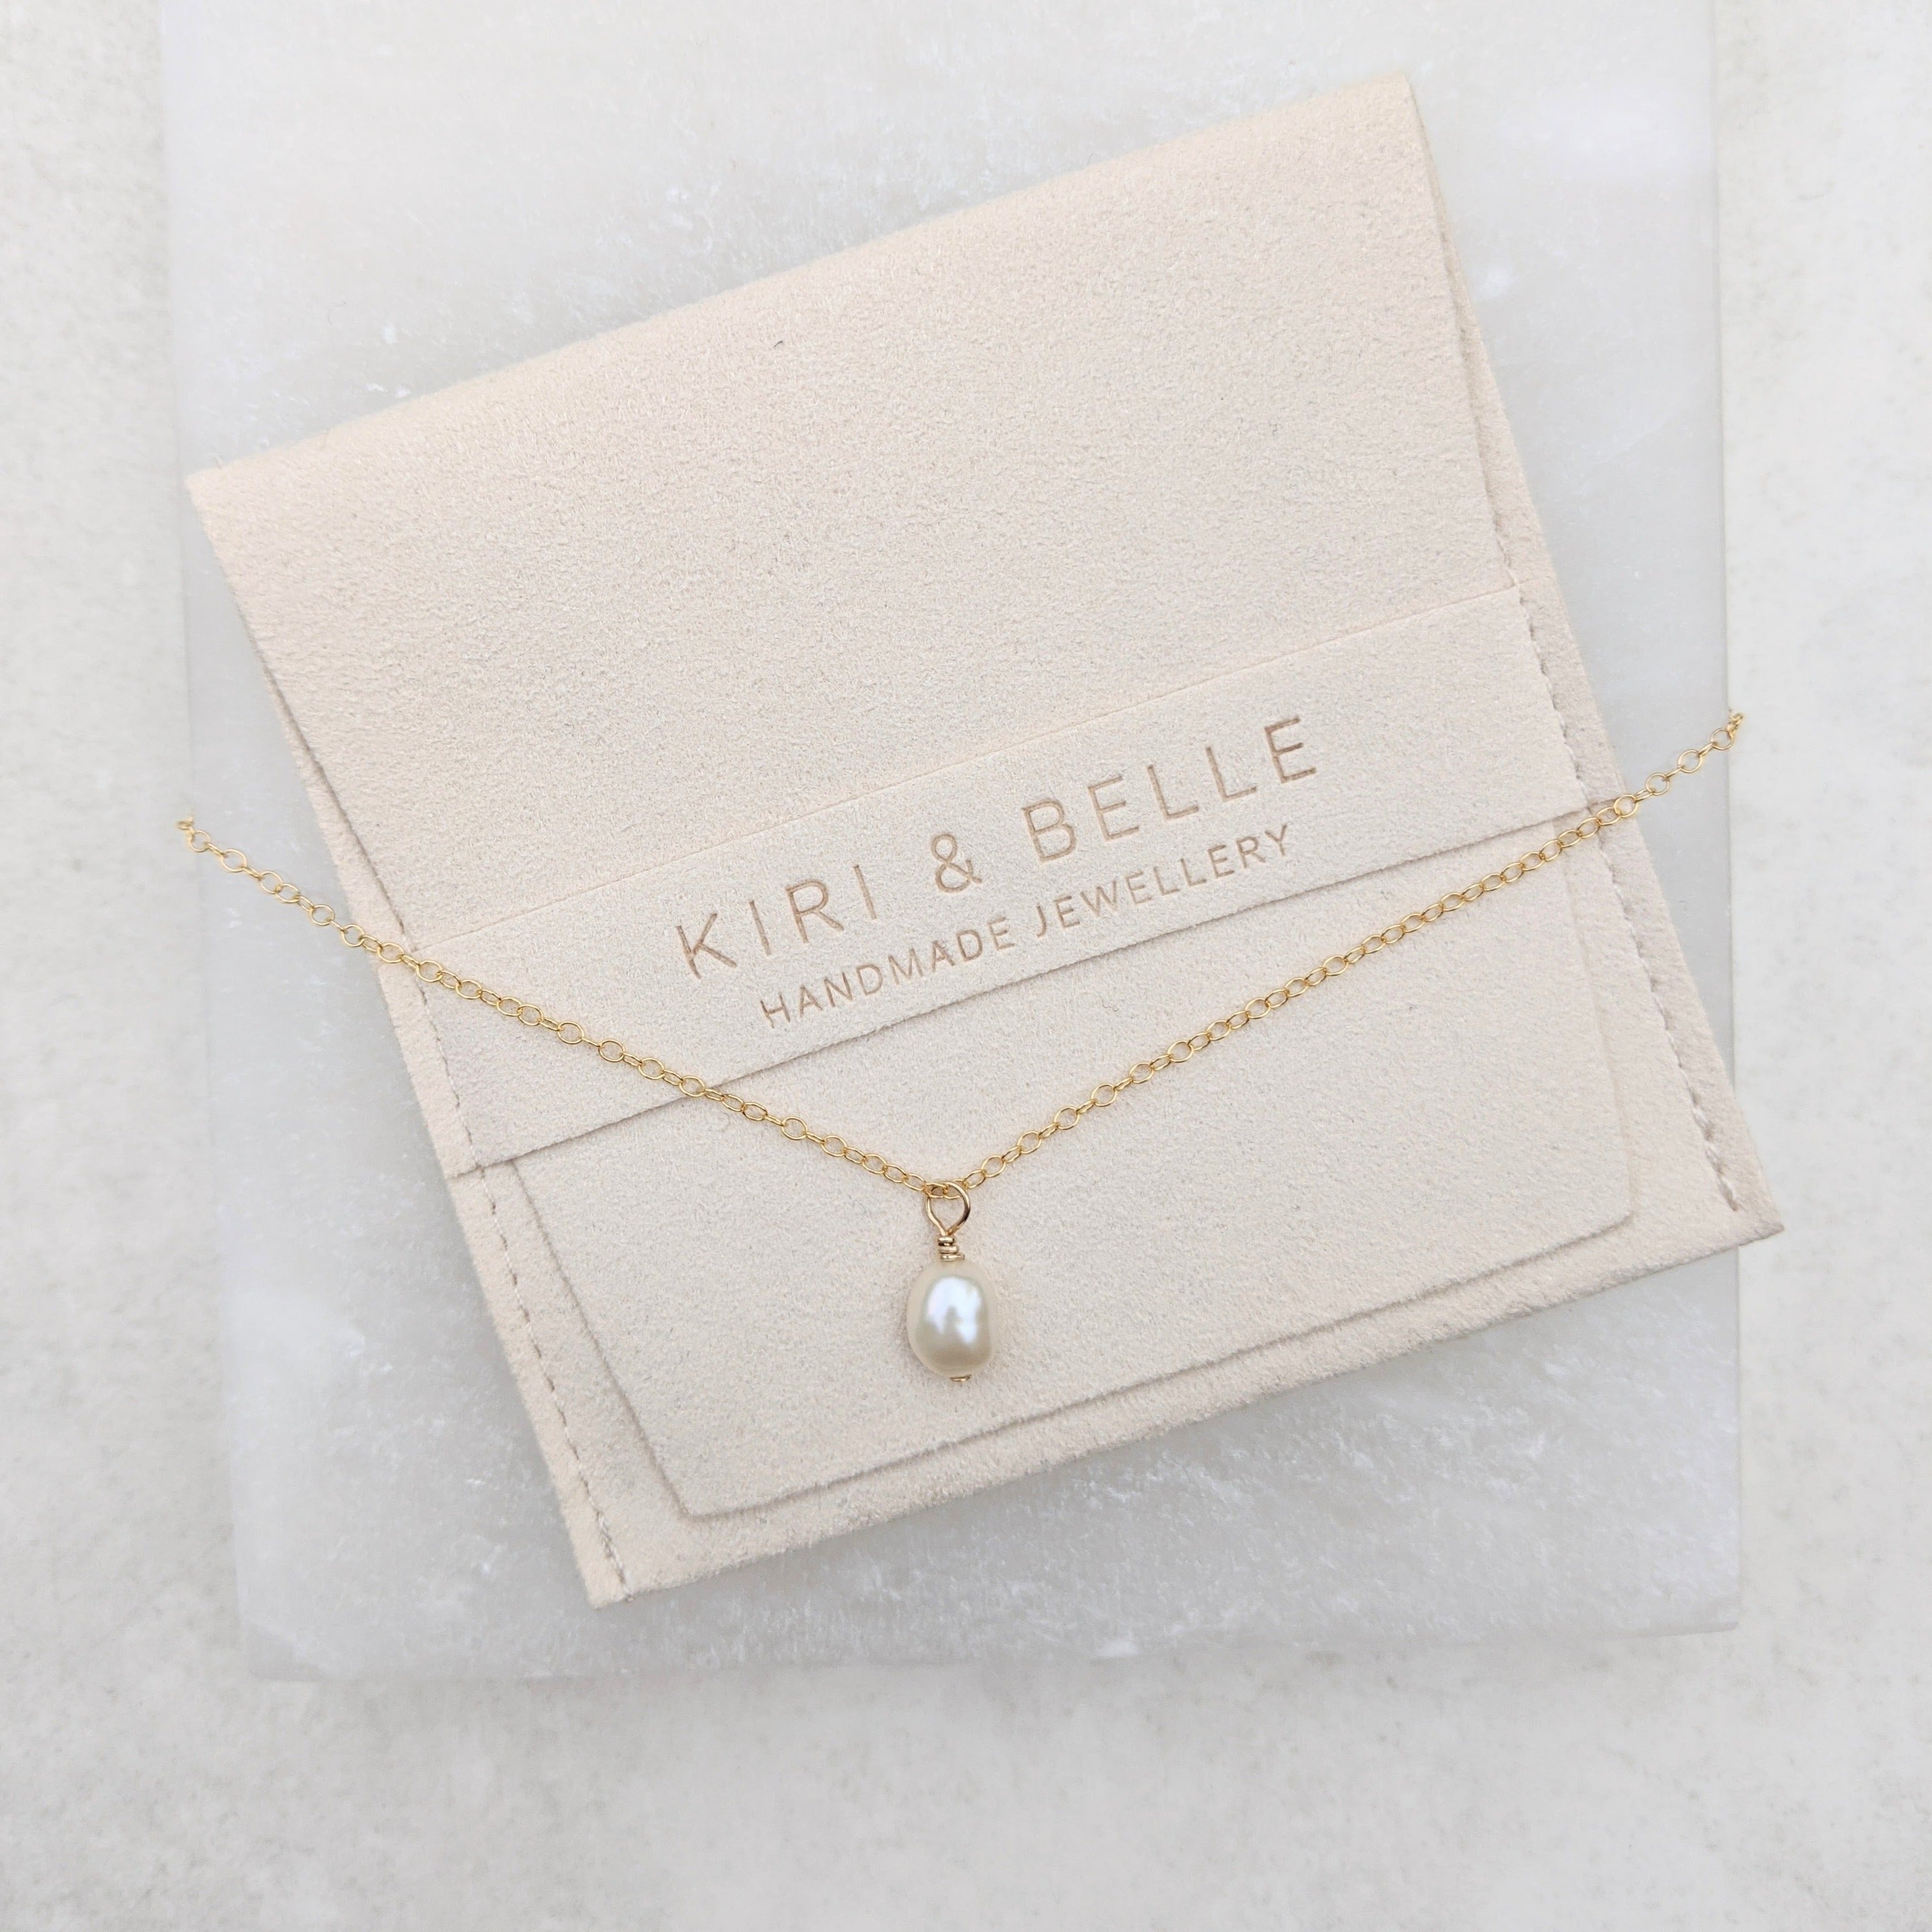 Baroque pearl pendant gold necklace on Kiri and Belle suede pouch